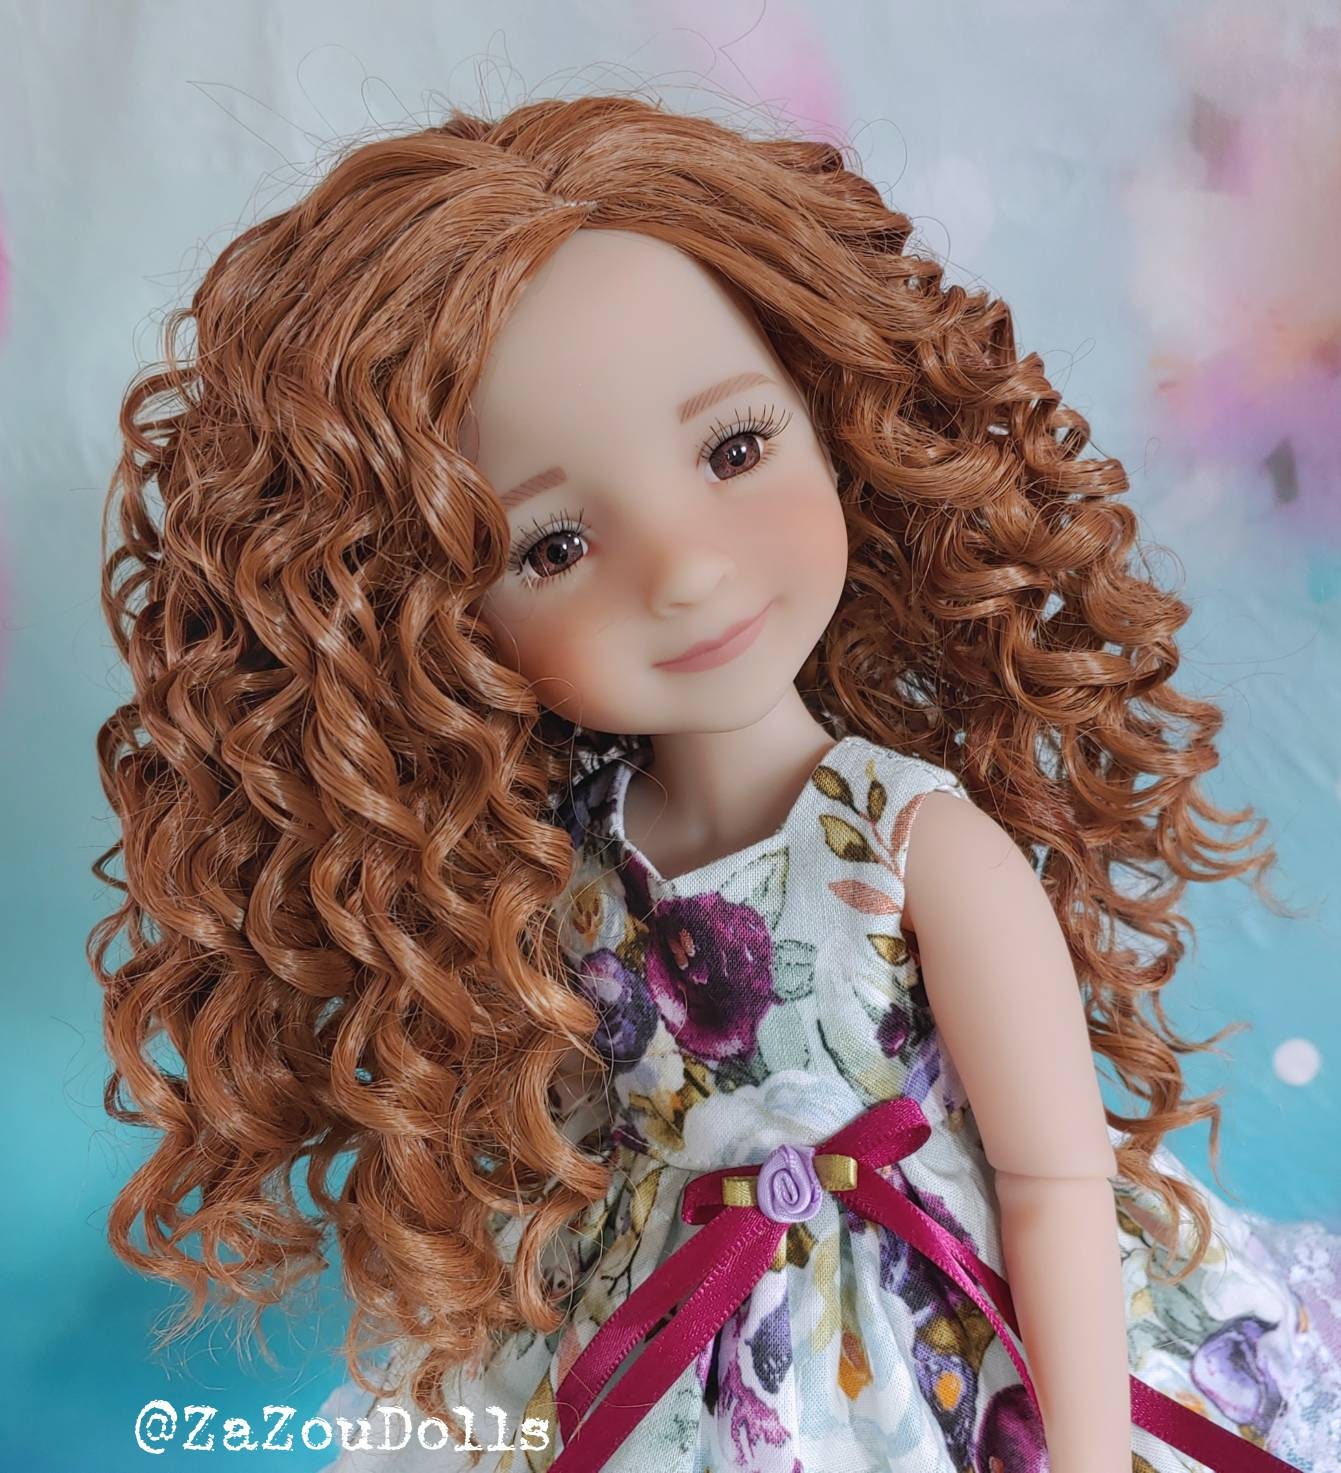 Custom  doll WIG for 14"  AG Dolls - Heat Safe-Tangle Resistant-fits 8-9" head size Kaye Wiggs  Wellie Wishers girls of the orient Fits SNUG